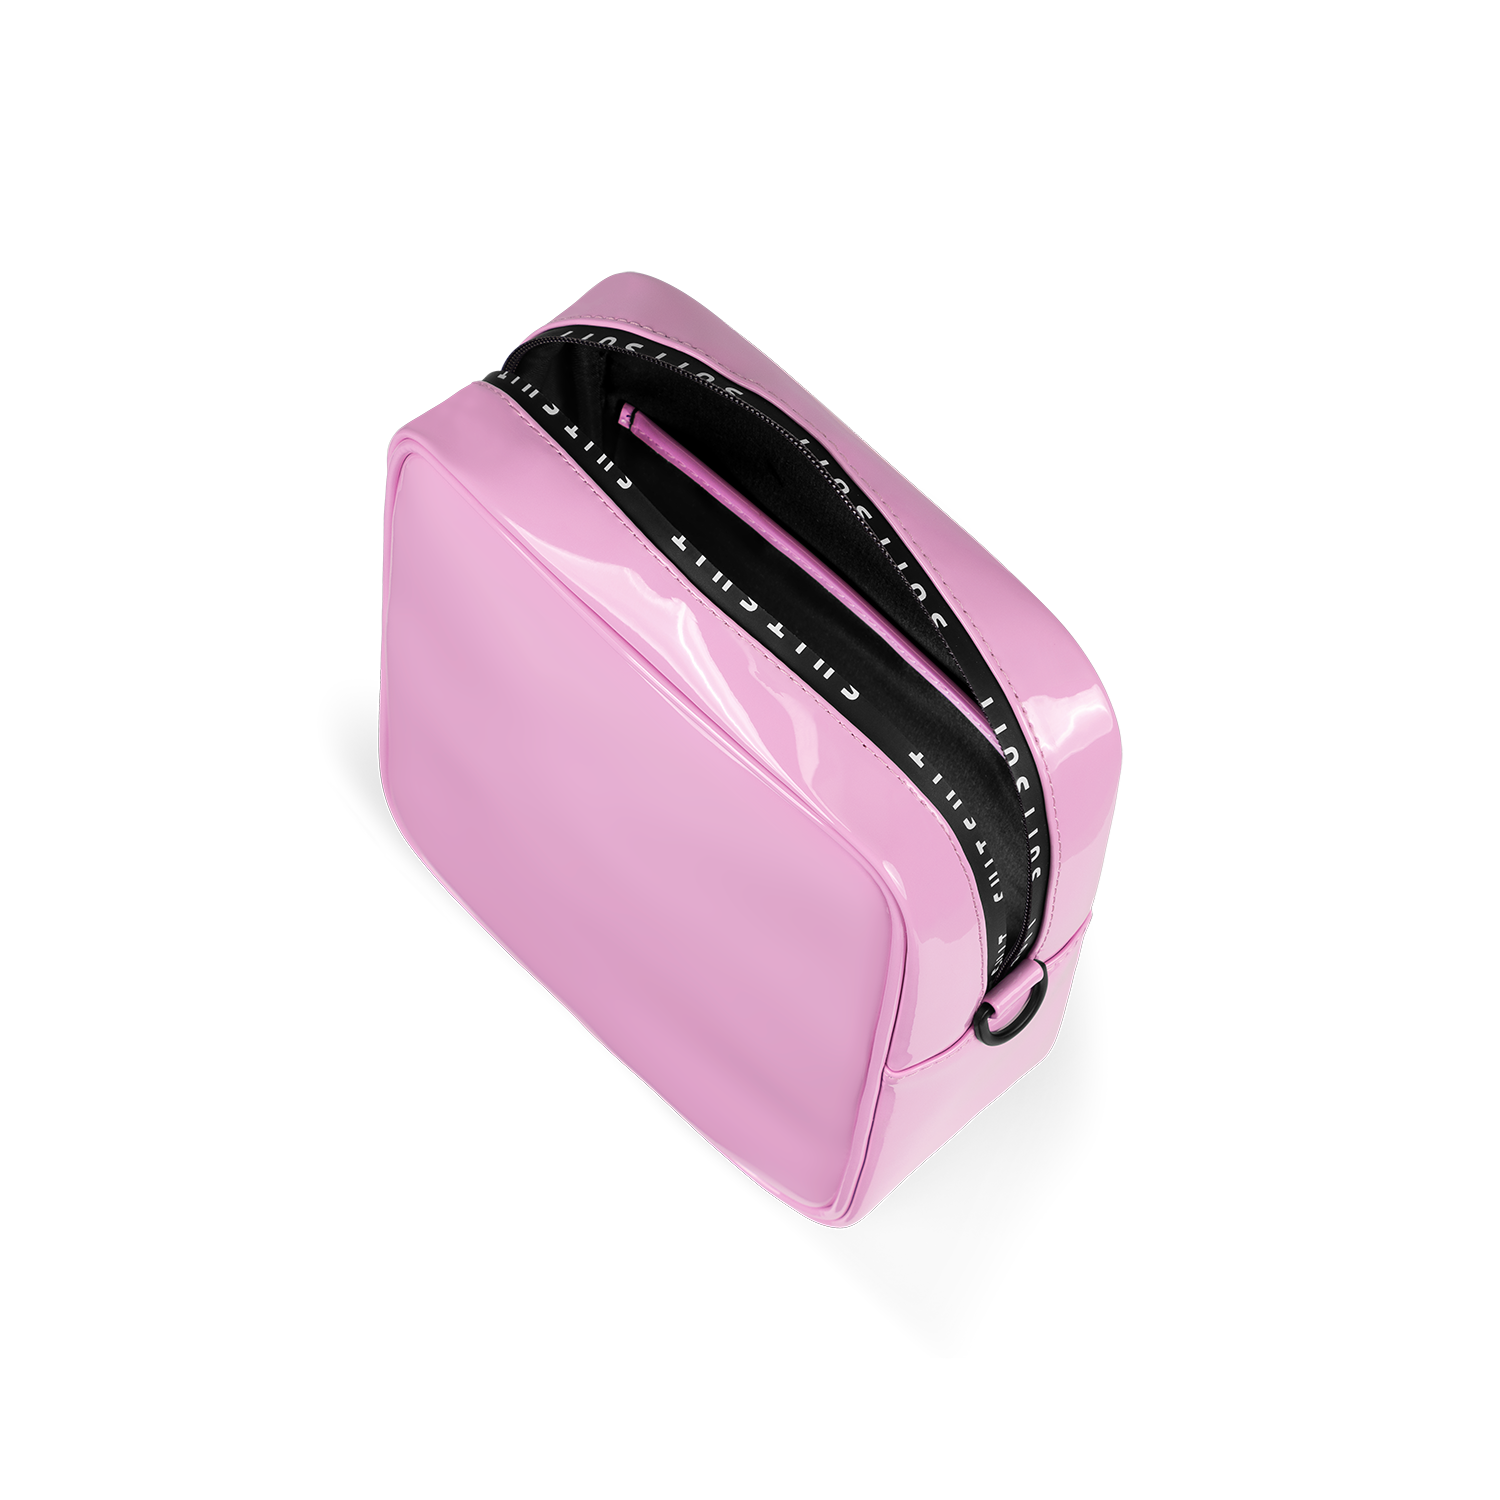 Expression - Fondant Pink - Toiletry Bag Upright